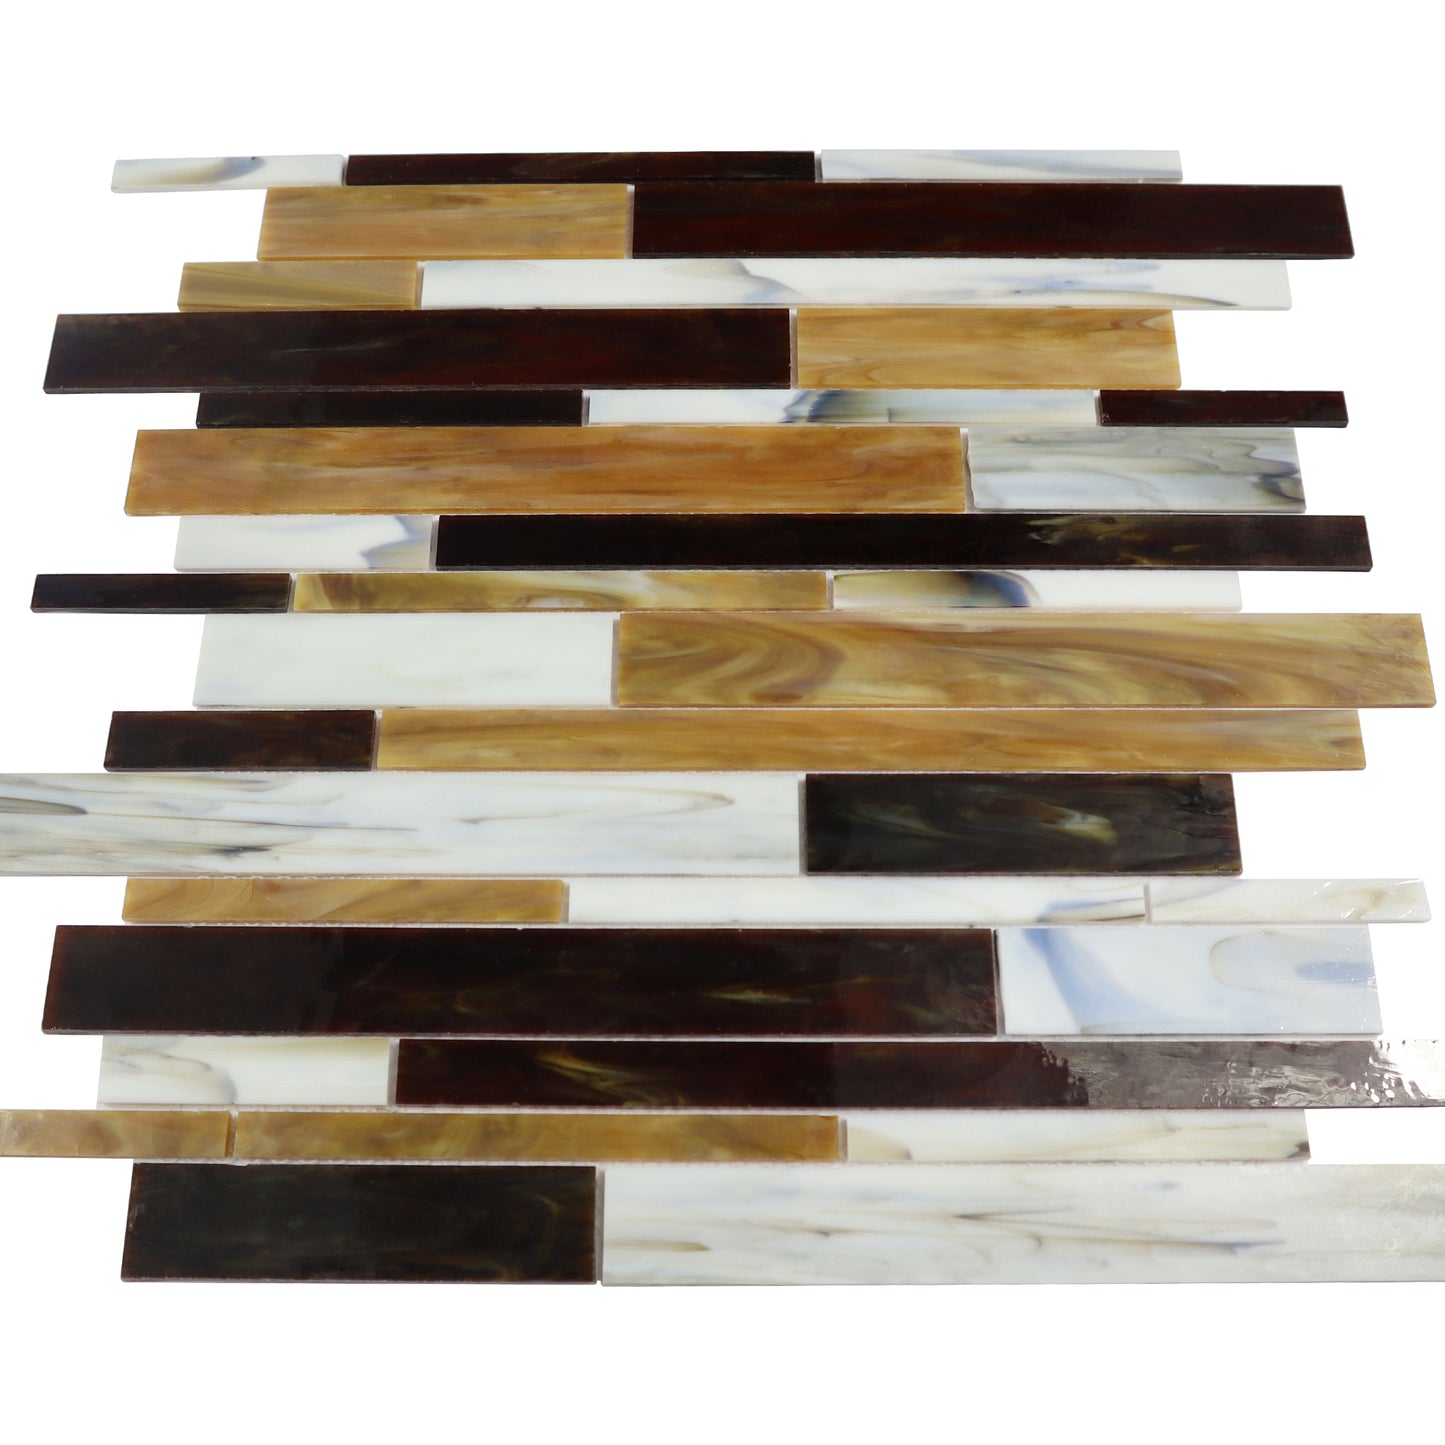 Stained Glass Linear Wall Backsplash Tile